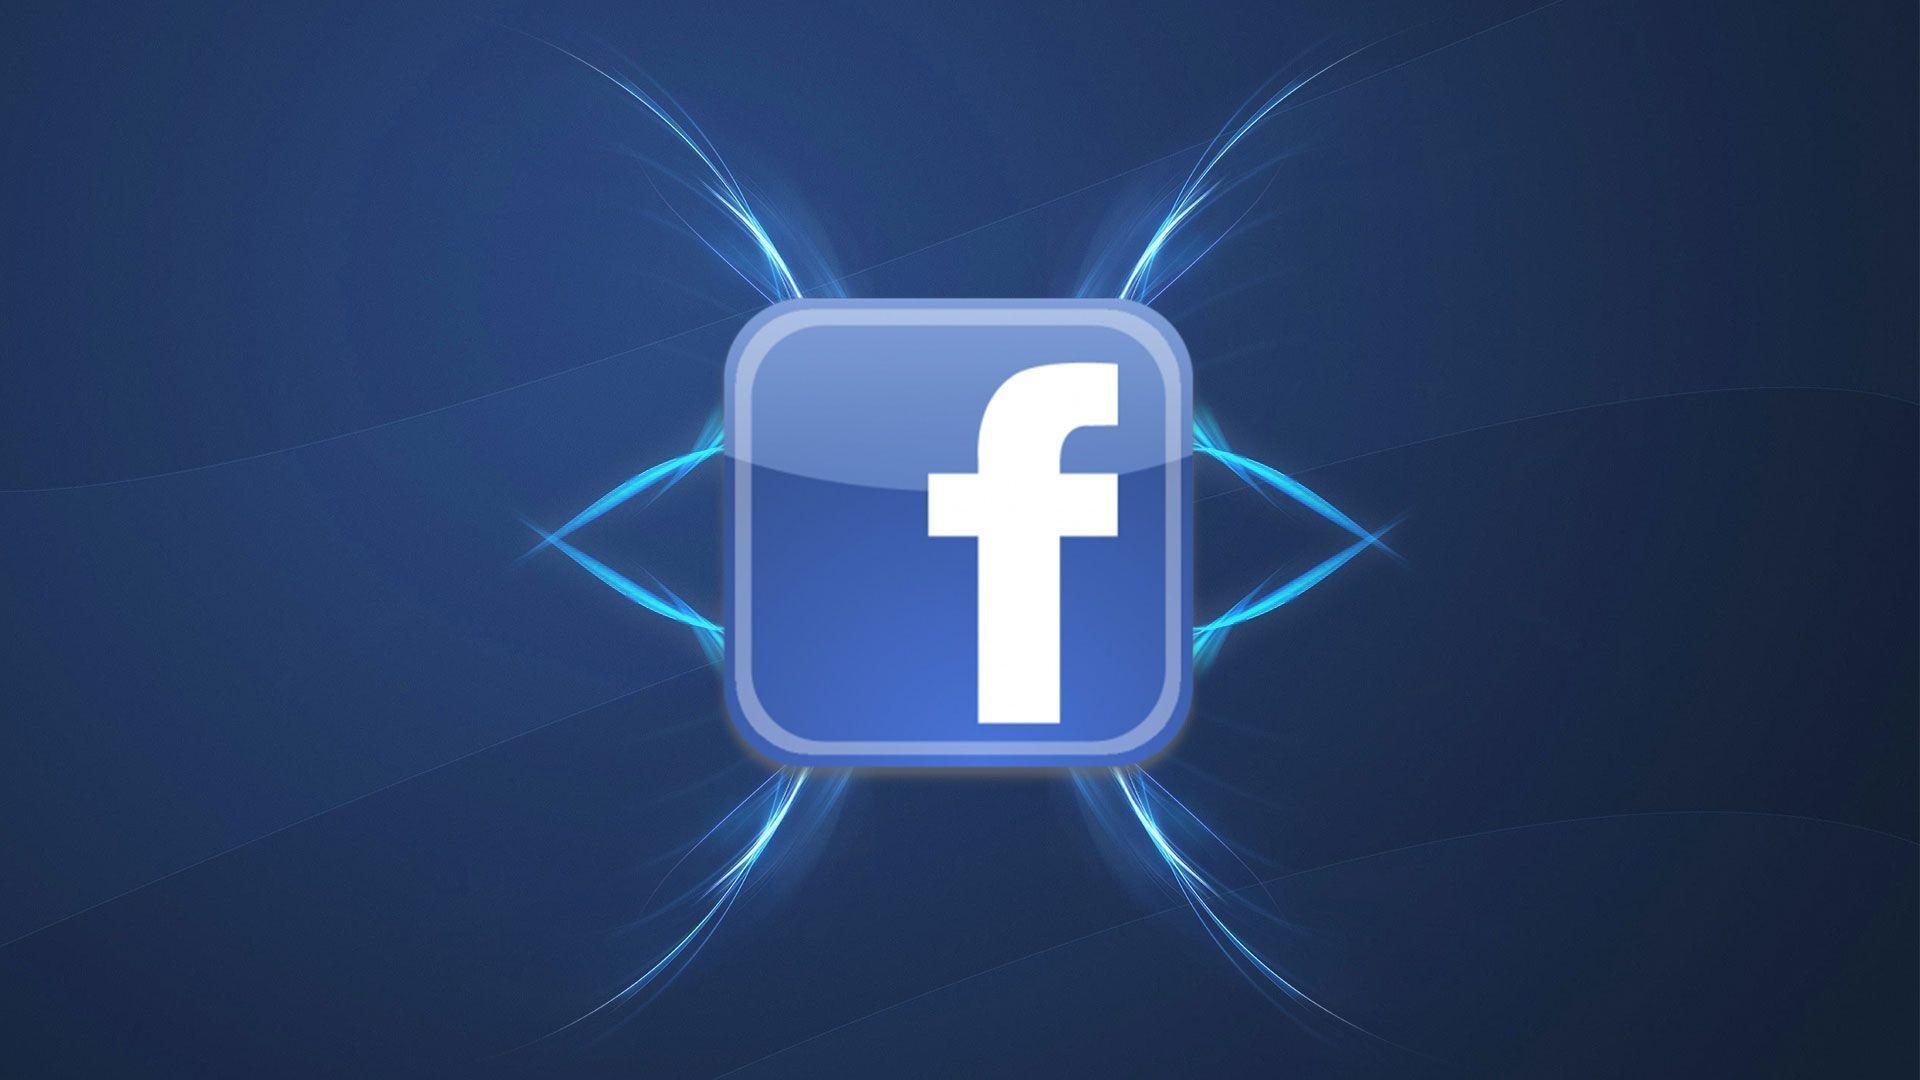 Facebook Icon Wallpapers - Wallpaper Cave